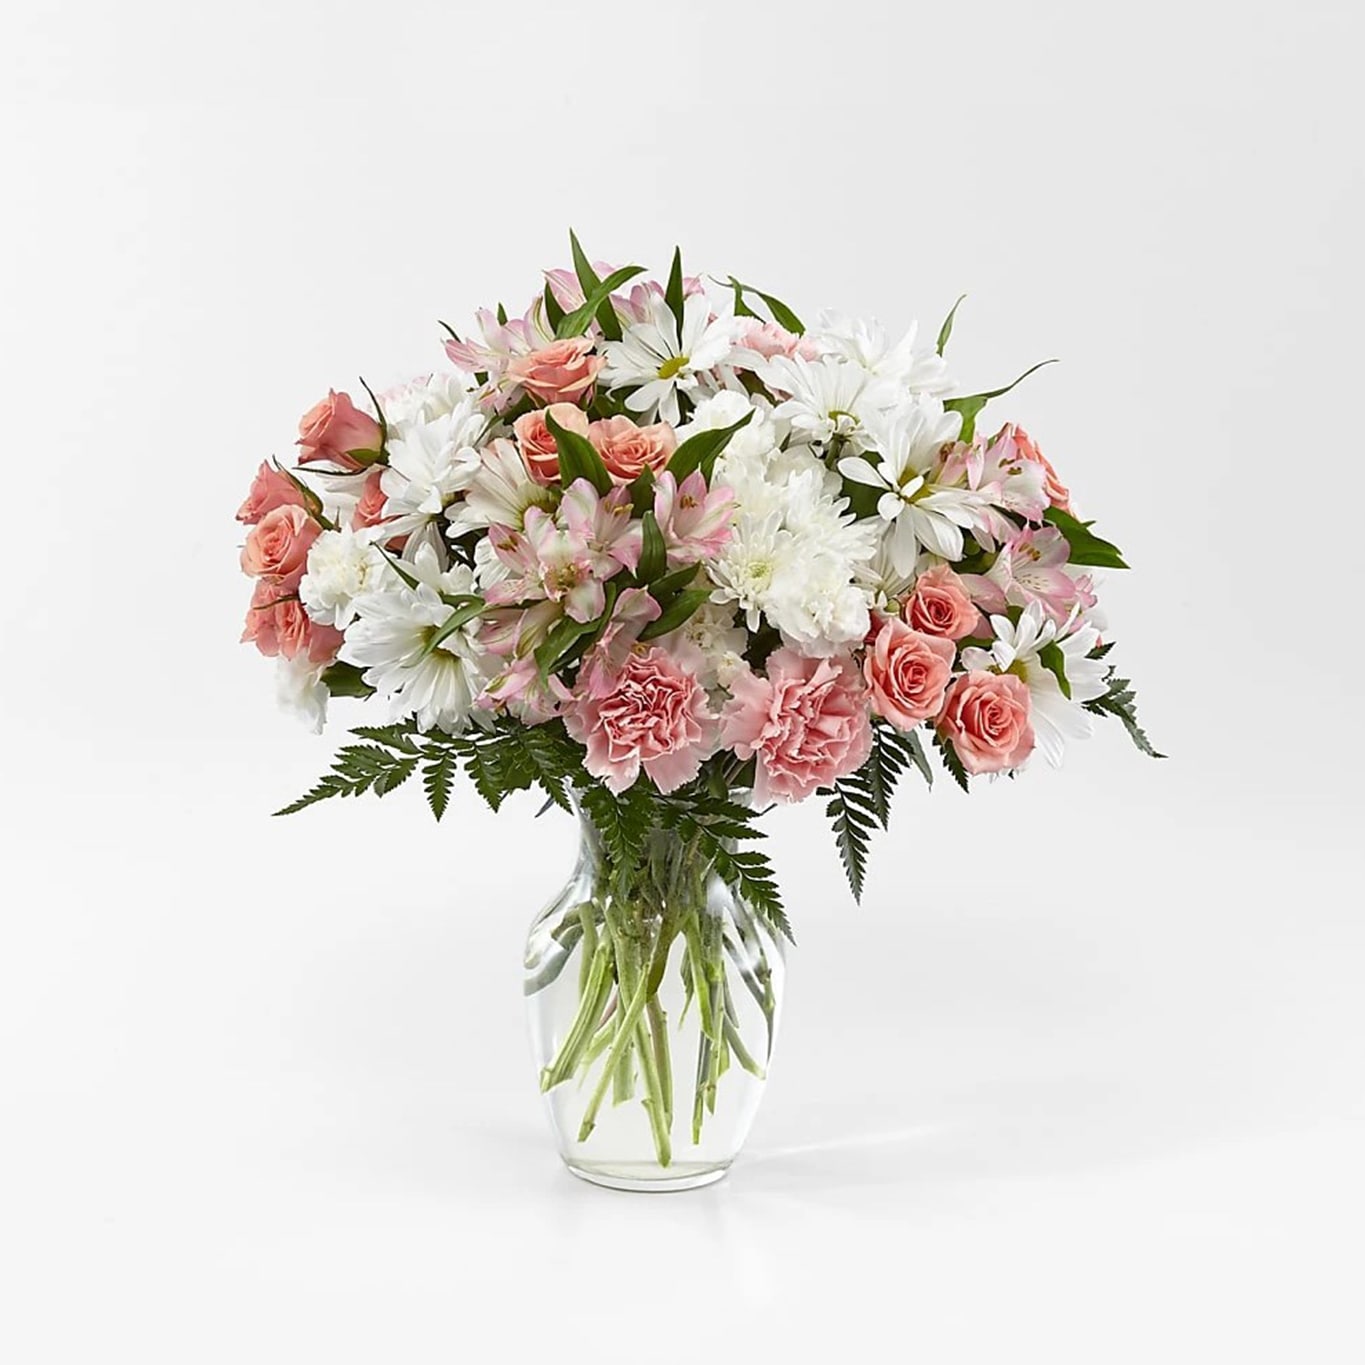 Pink and White Flowers, flowers for garden and home decoration with daisies, mini roses, astromeliads, it is a beautiful gift for anniversary, flower gift for birthday, flowers for all occasions and decoration, Fresh Flowers Orlando.